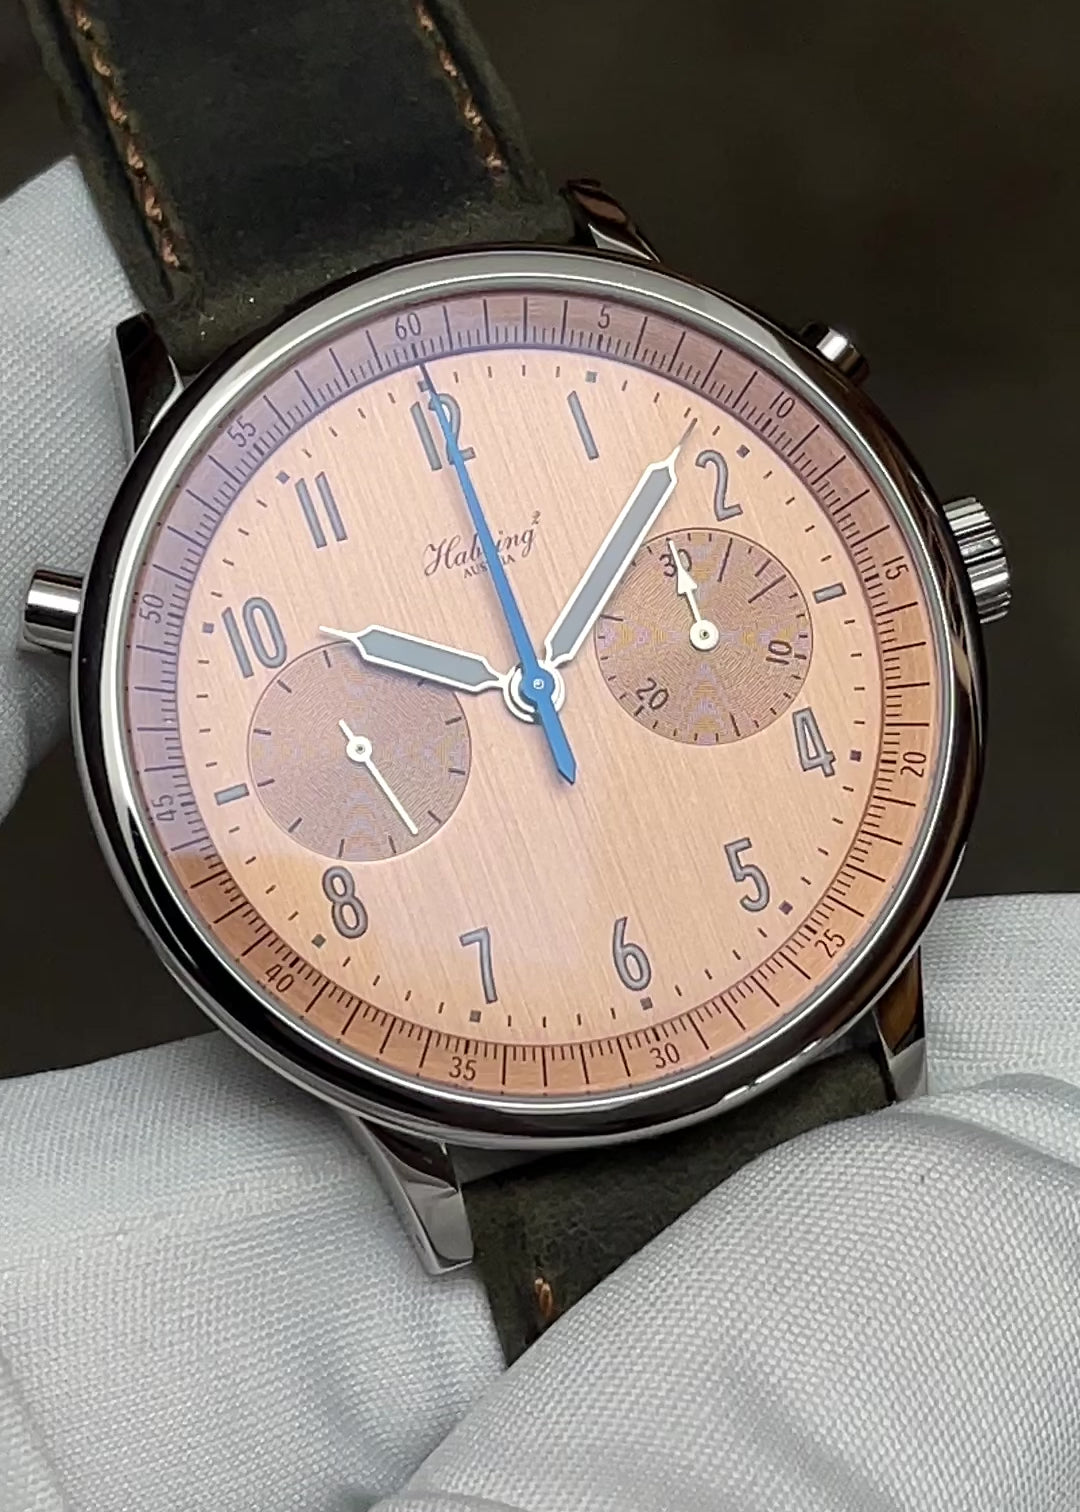 Video of Habring2 Doppel 38 Salmon Dial